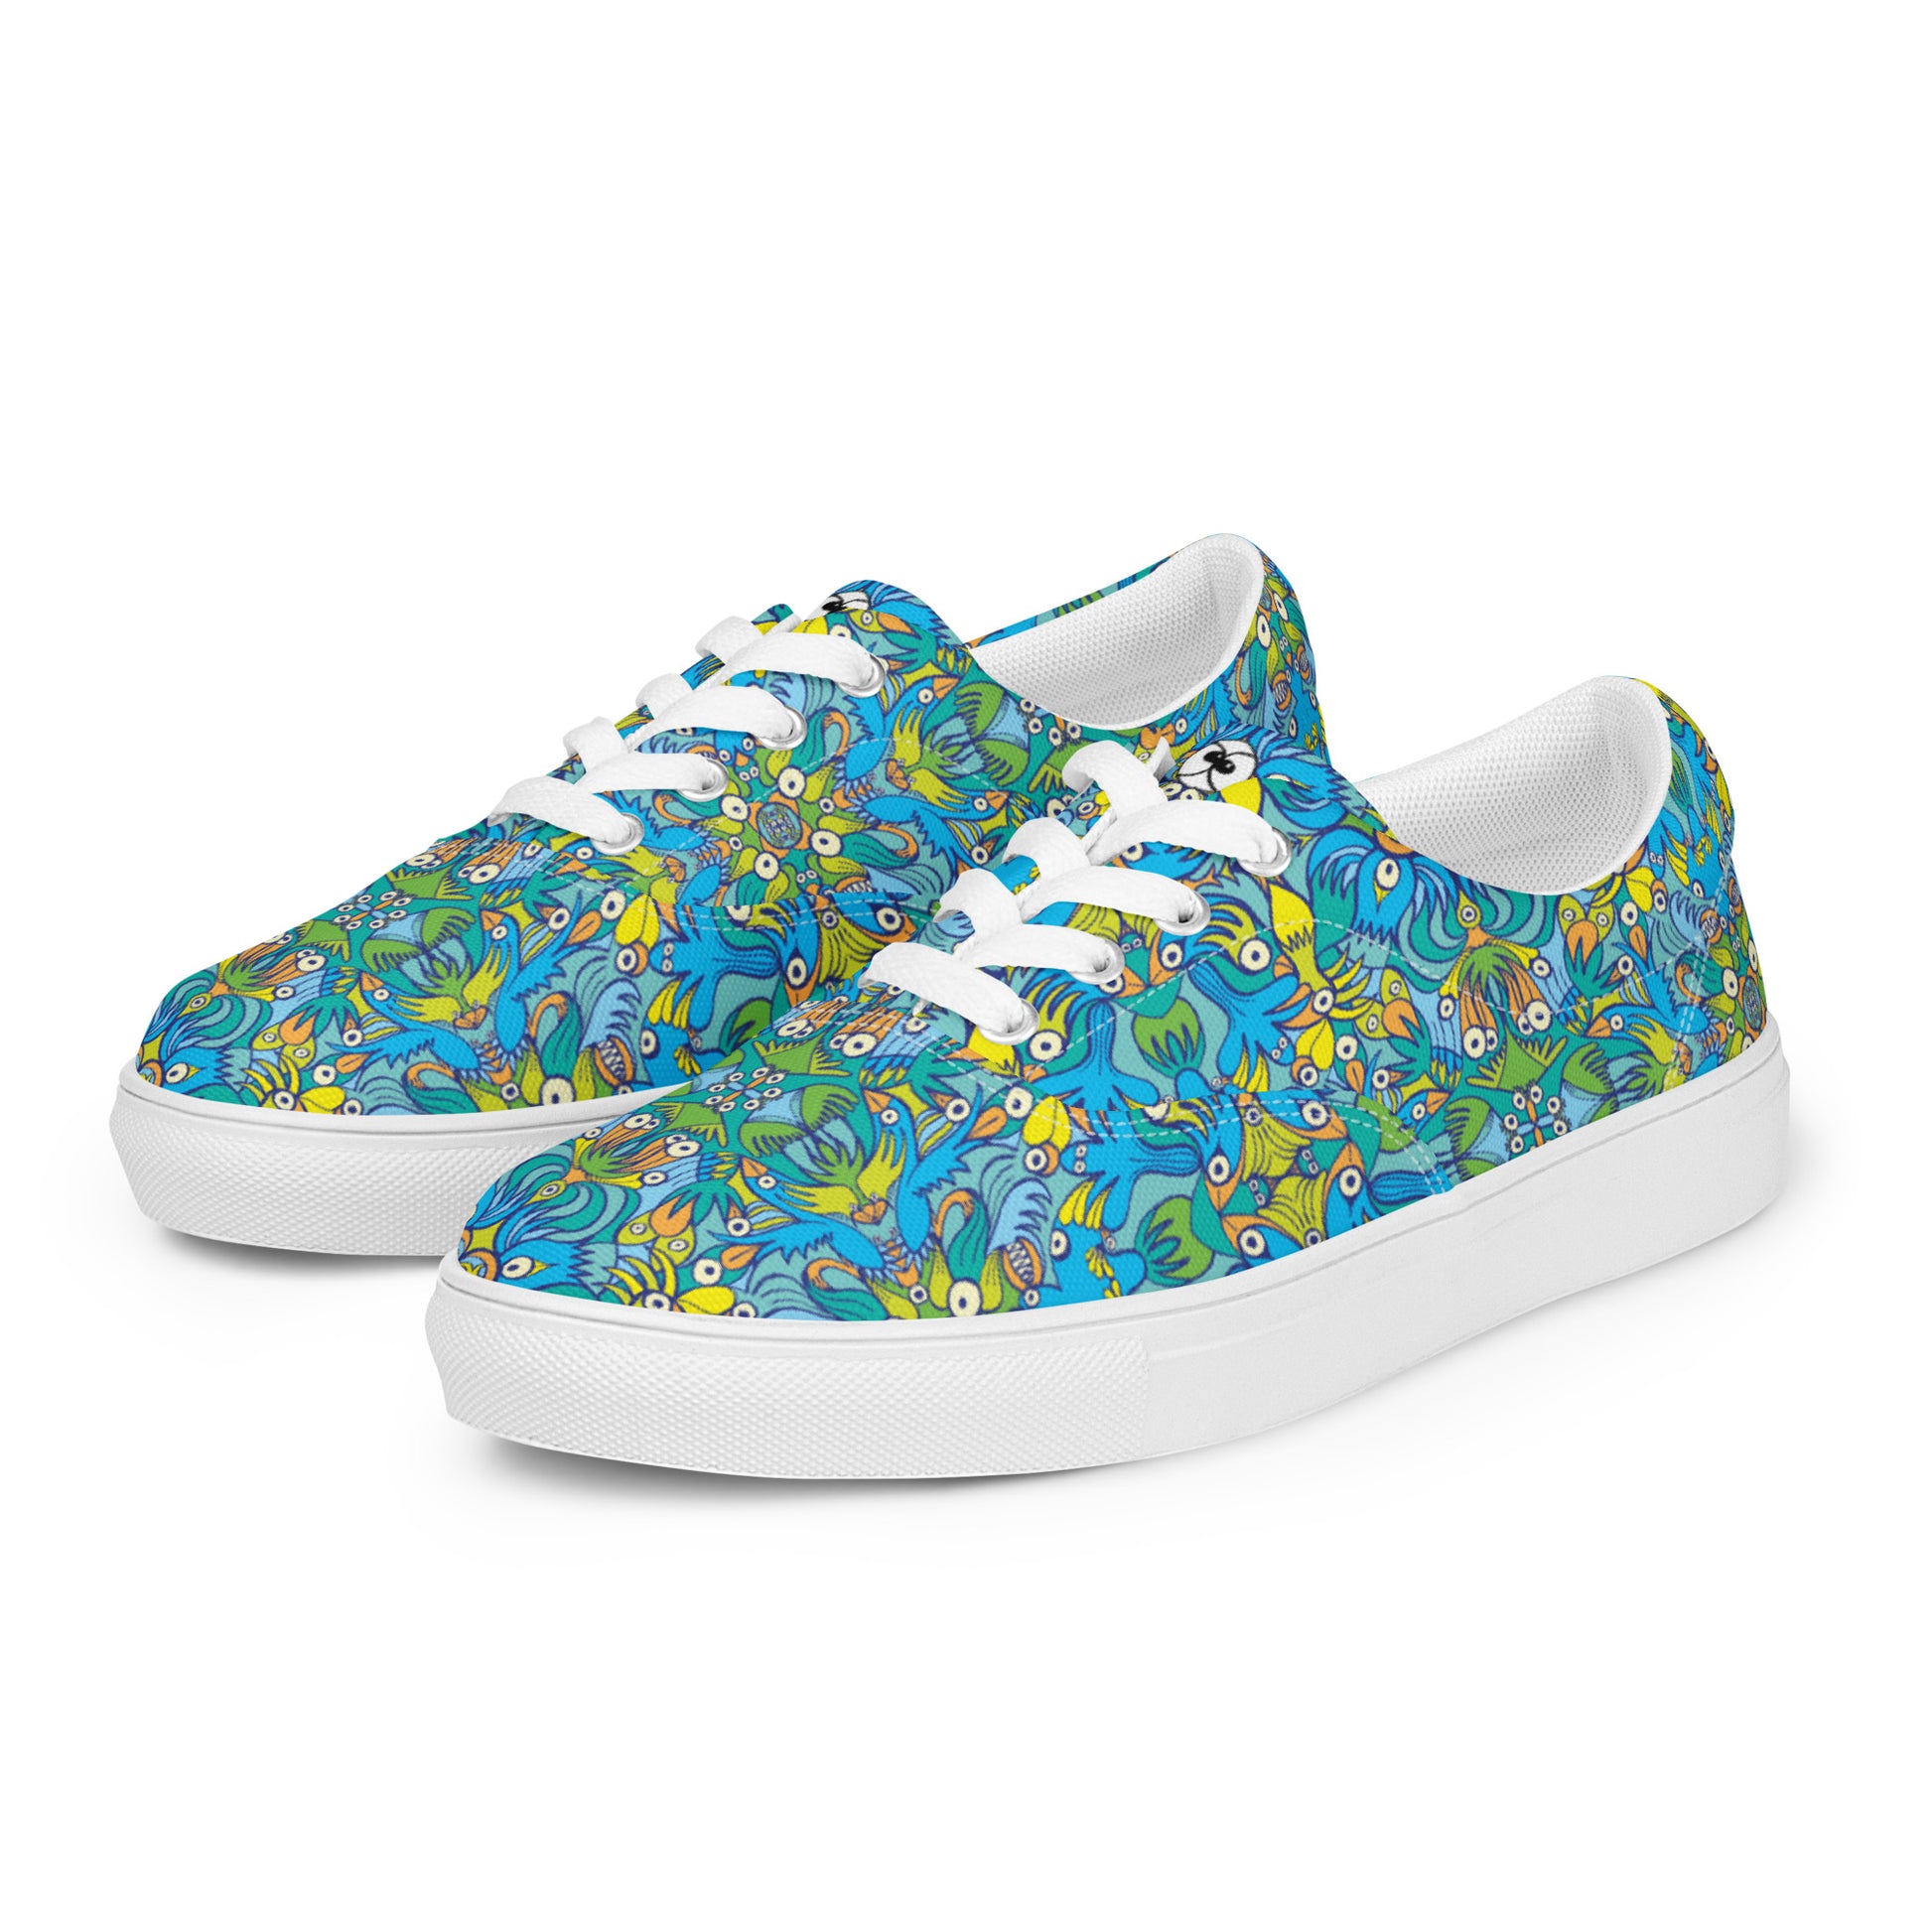 Exotic birds tropical pattern Men’s lace-up canvas shoes. Overview